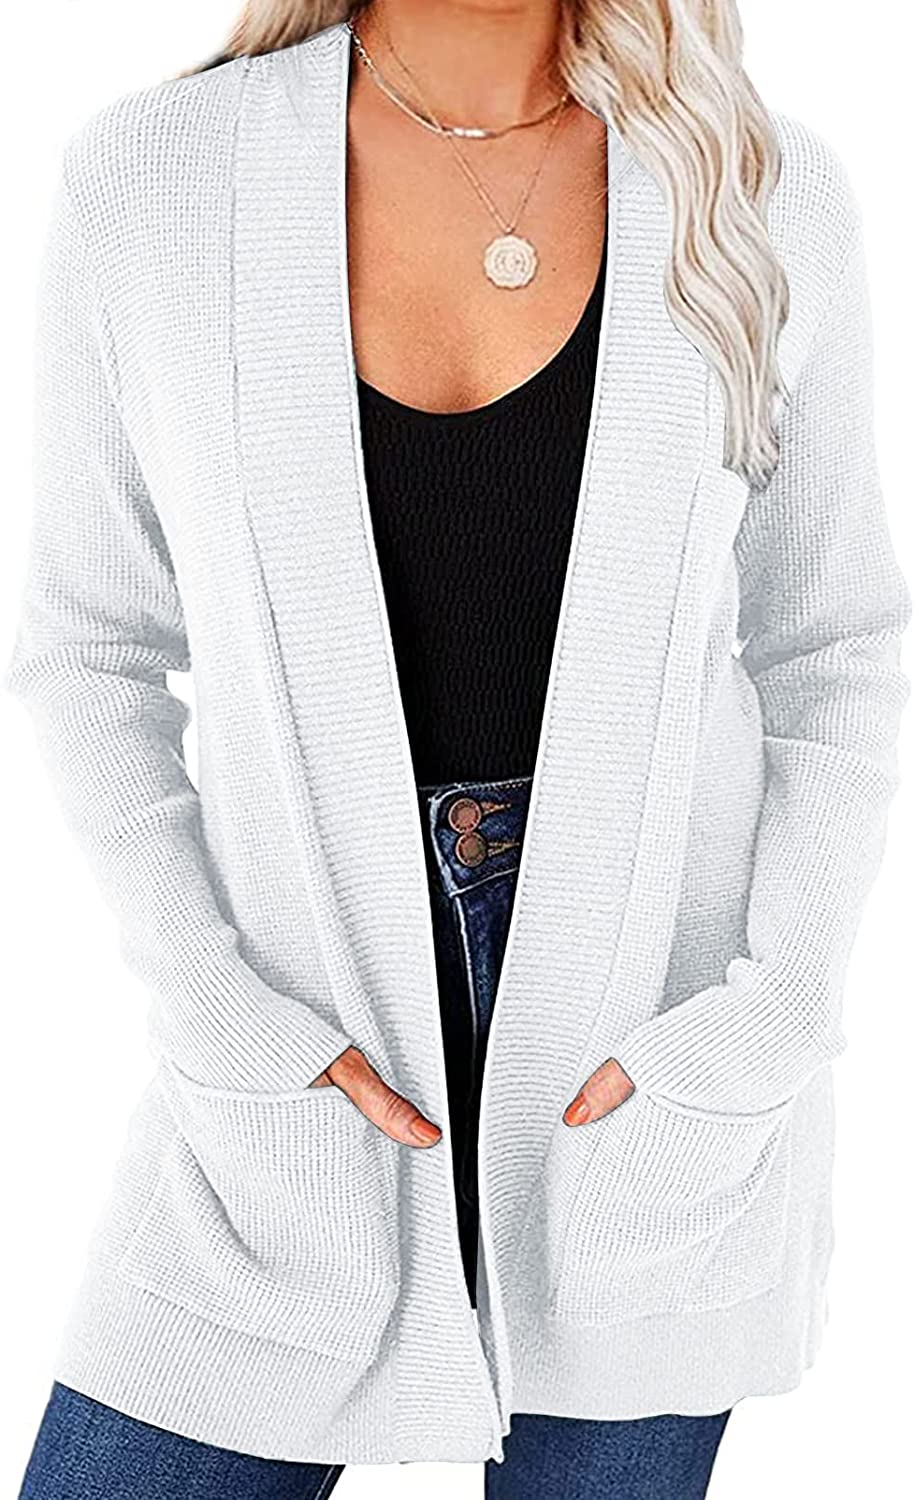 PIIRESO Women's Long Sleeve Waffle Knit Cardigan Open Front Casual Fall Sweaters with Pockets 